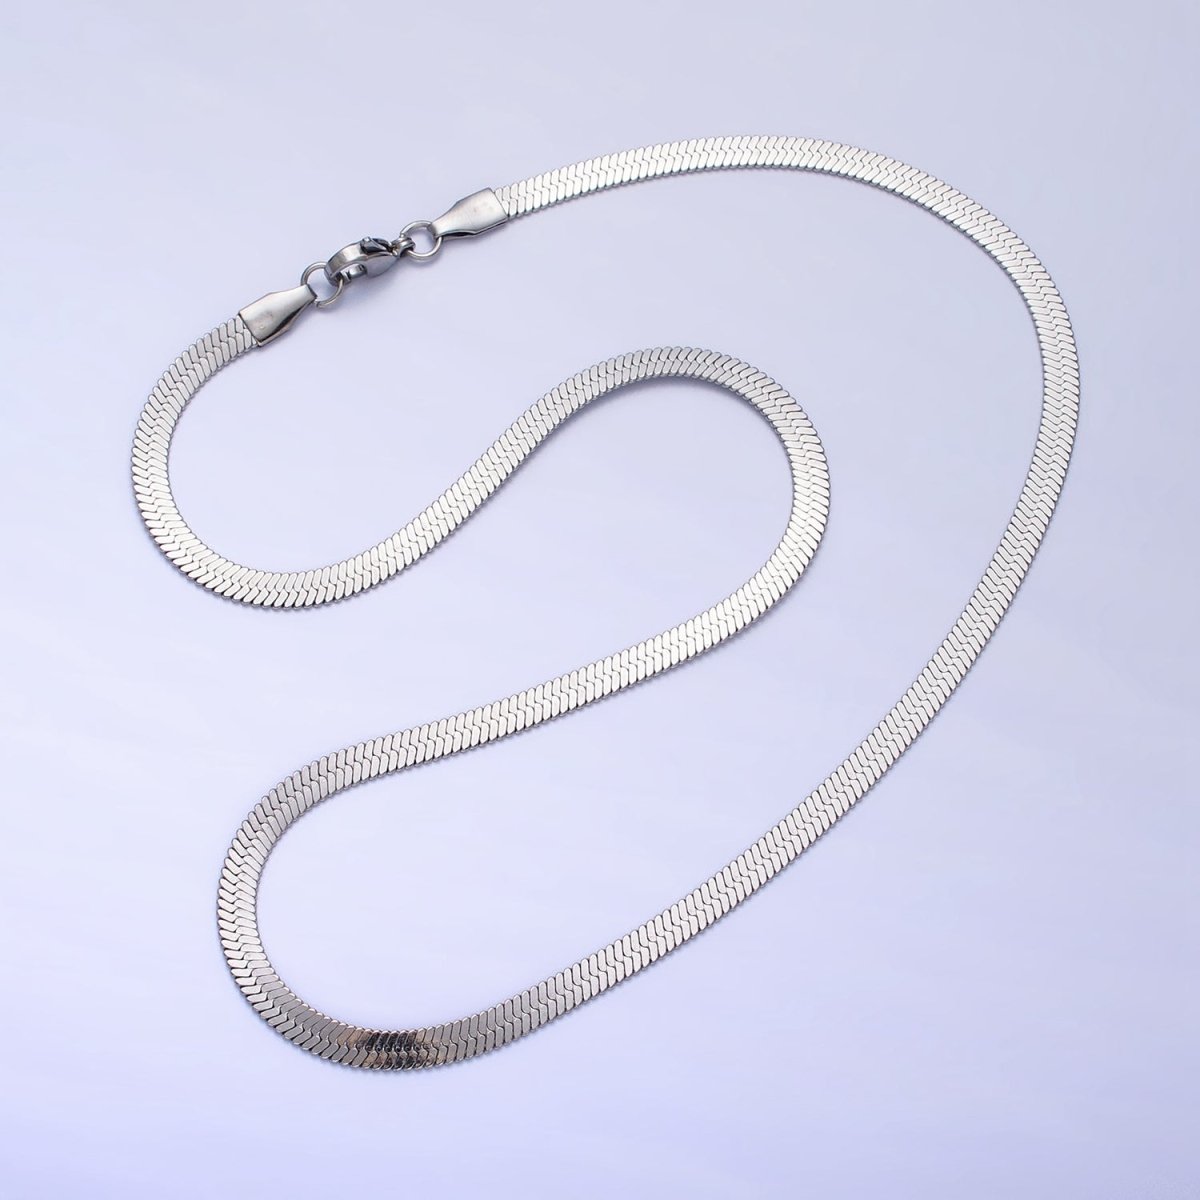 4mm Gold Herringbone Chain Necklace Silver Flat Snake Chain Stainless Steel Chain 18 inch | WA-1554 WA-1555 Clearance Pricing - DLUXCA